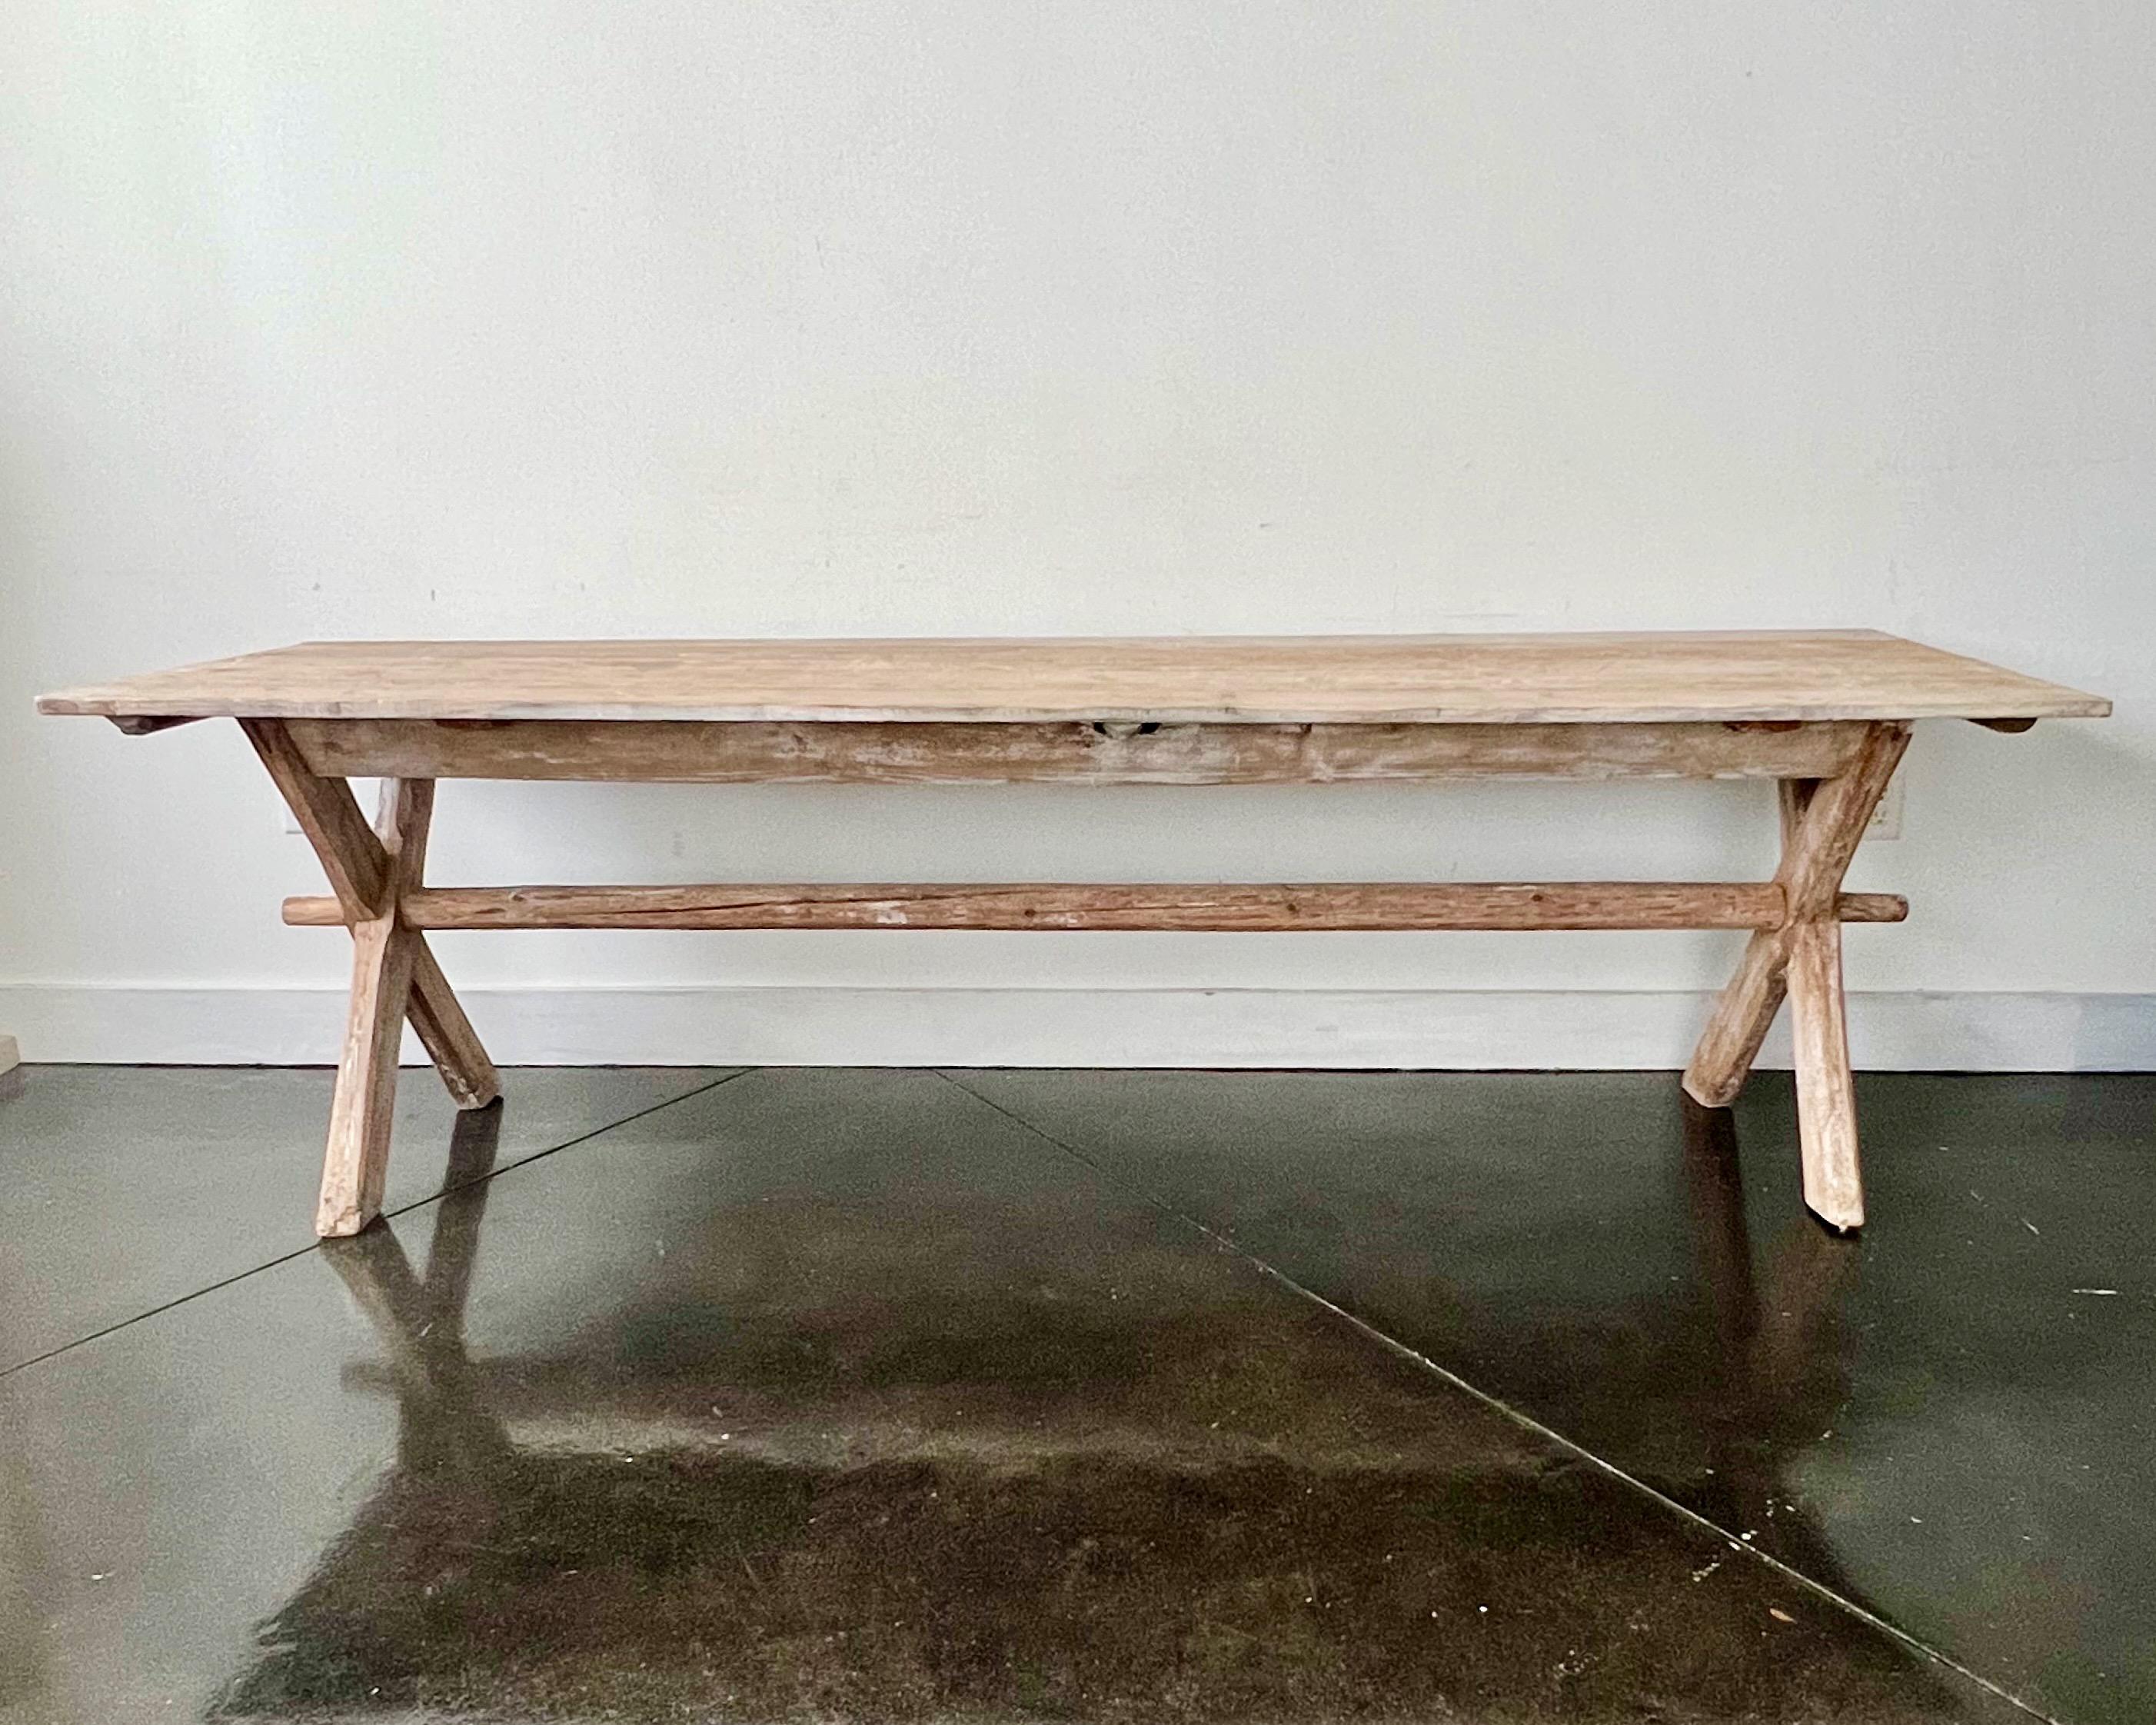 19th century French Long Country Harvesting Table In Good Condition For Sale In Charleston, SC